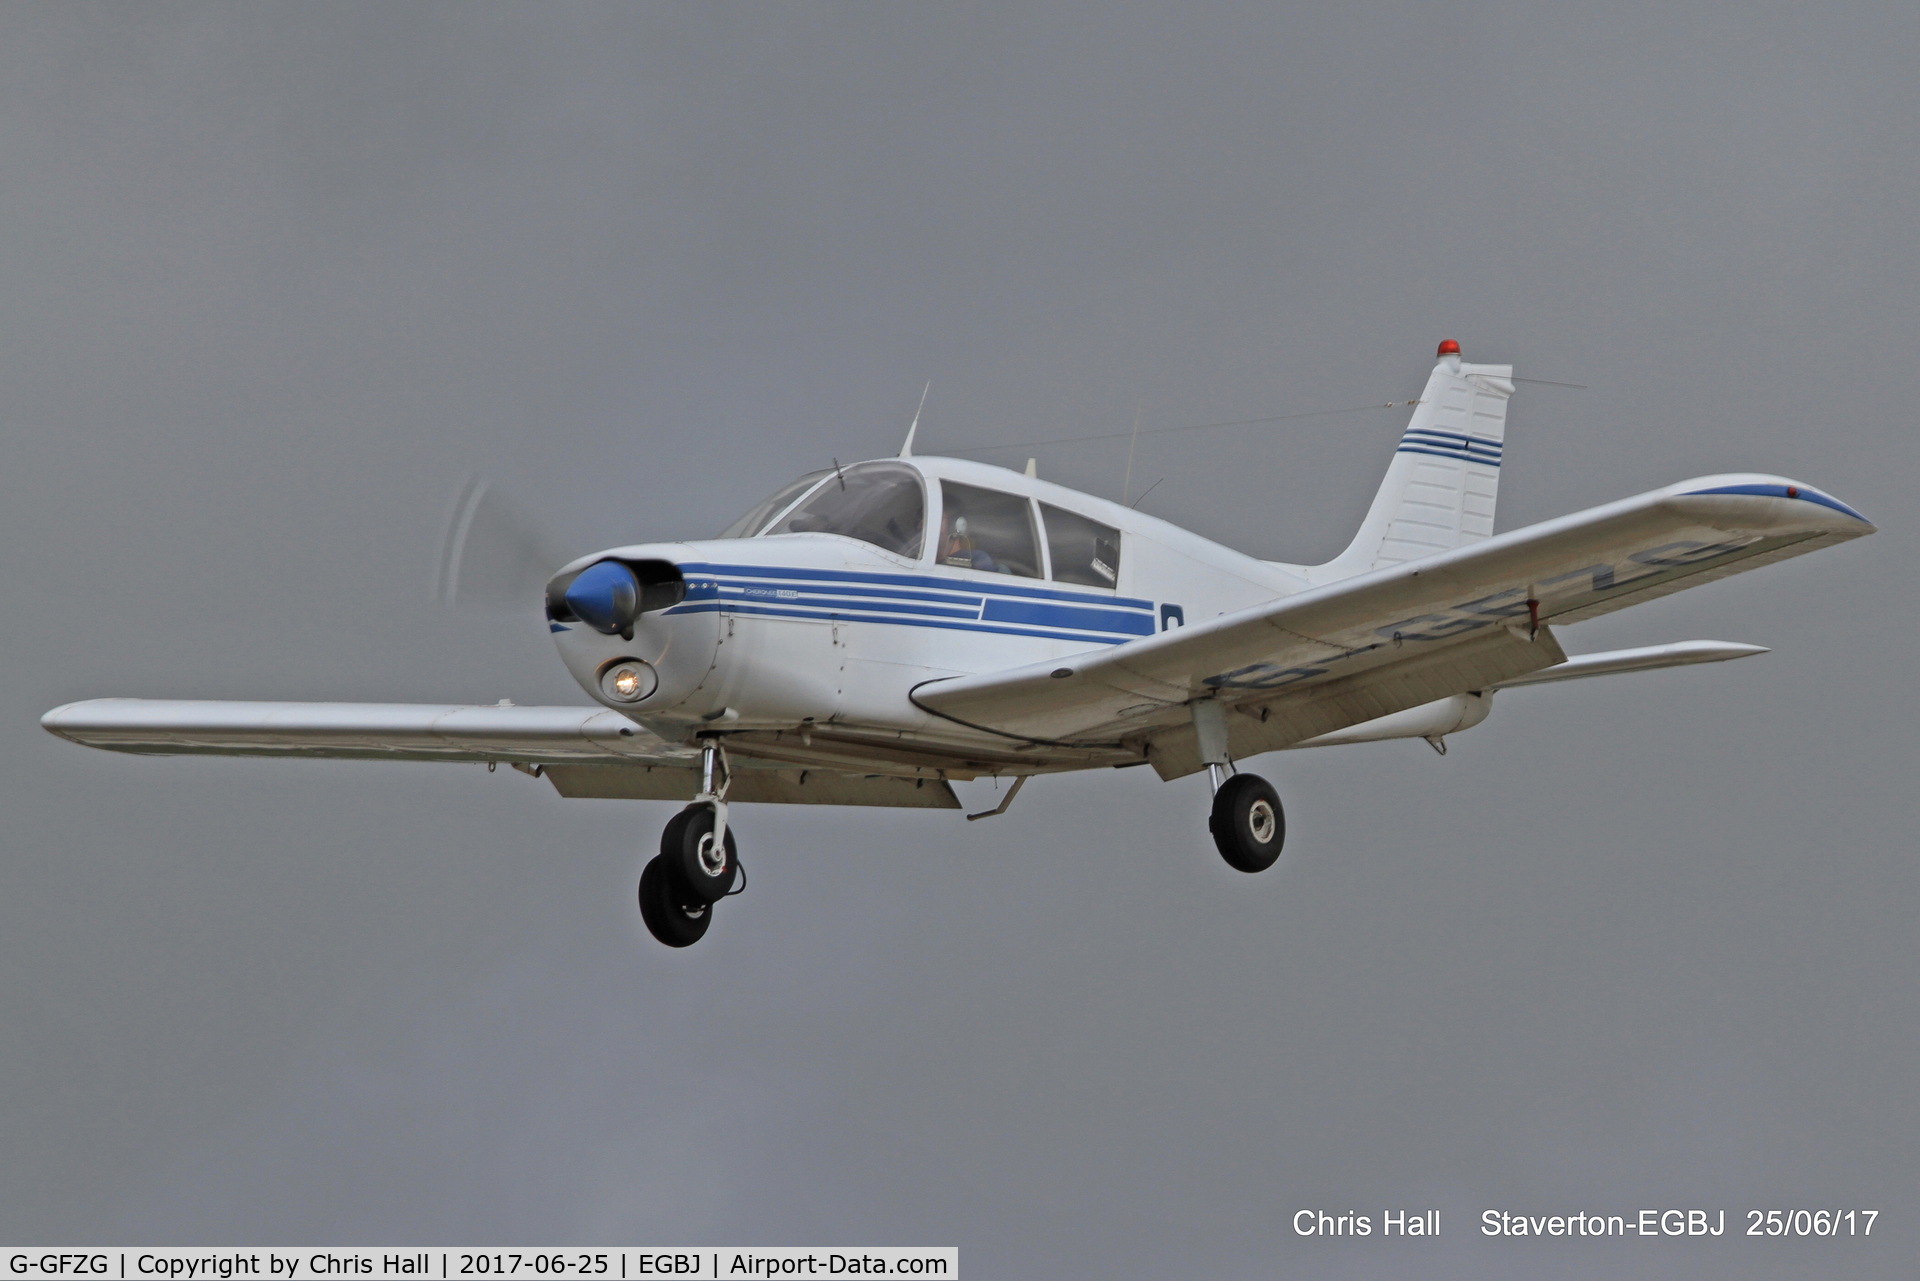 G-GFZG, 1973 Piper PA-28-140 Cherokee C/N 28-7225350, Project Propeller at Staverton